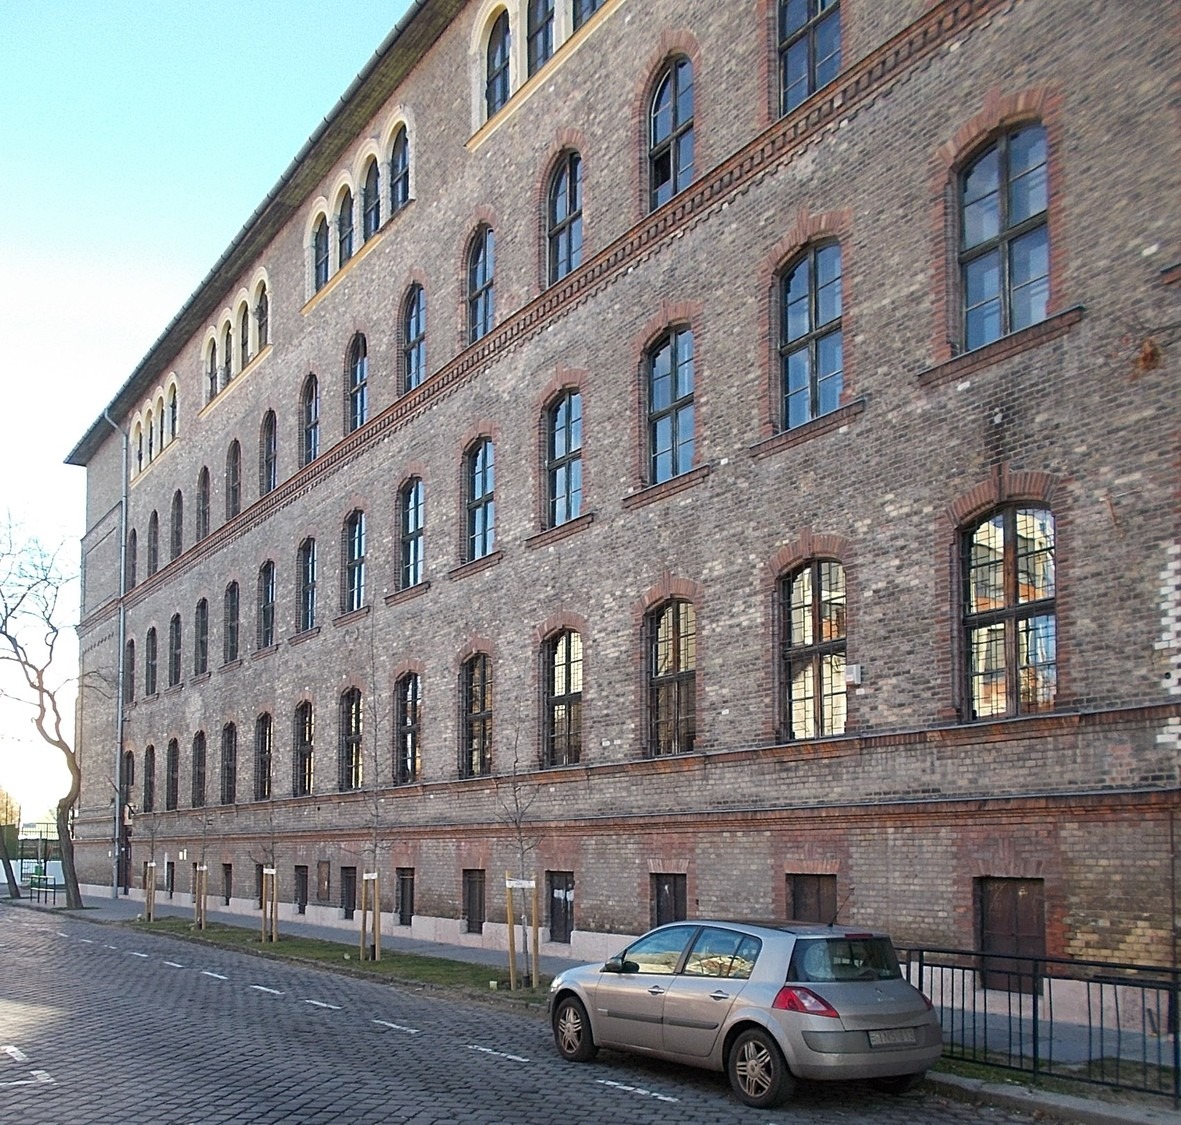 A car parked in front of a large brick building

Description automatically generated with medium confidence